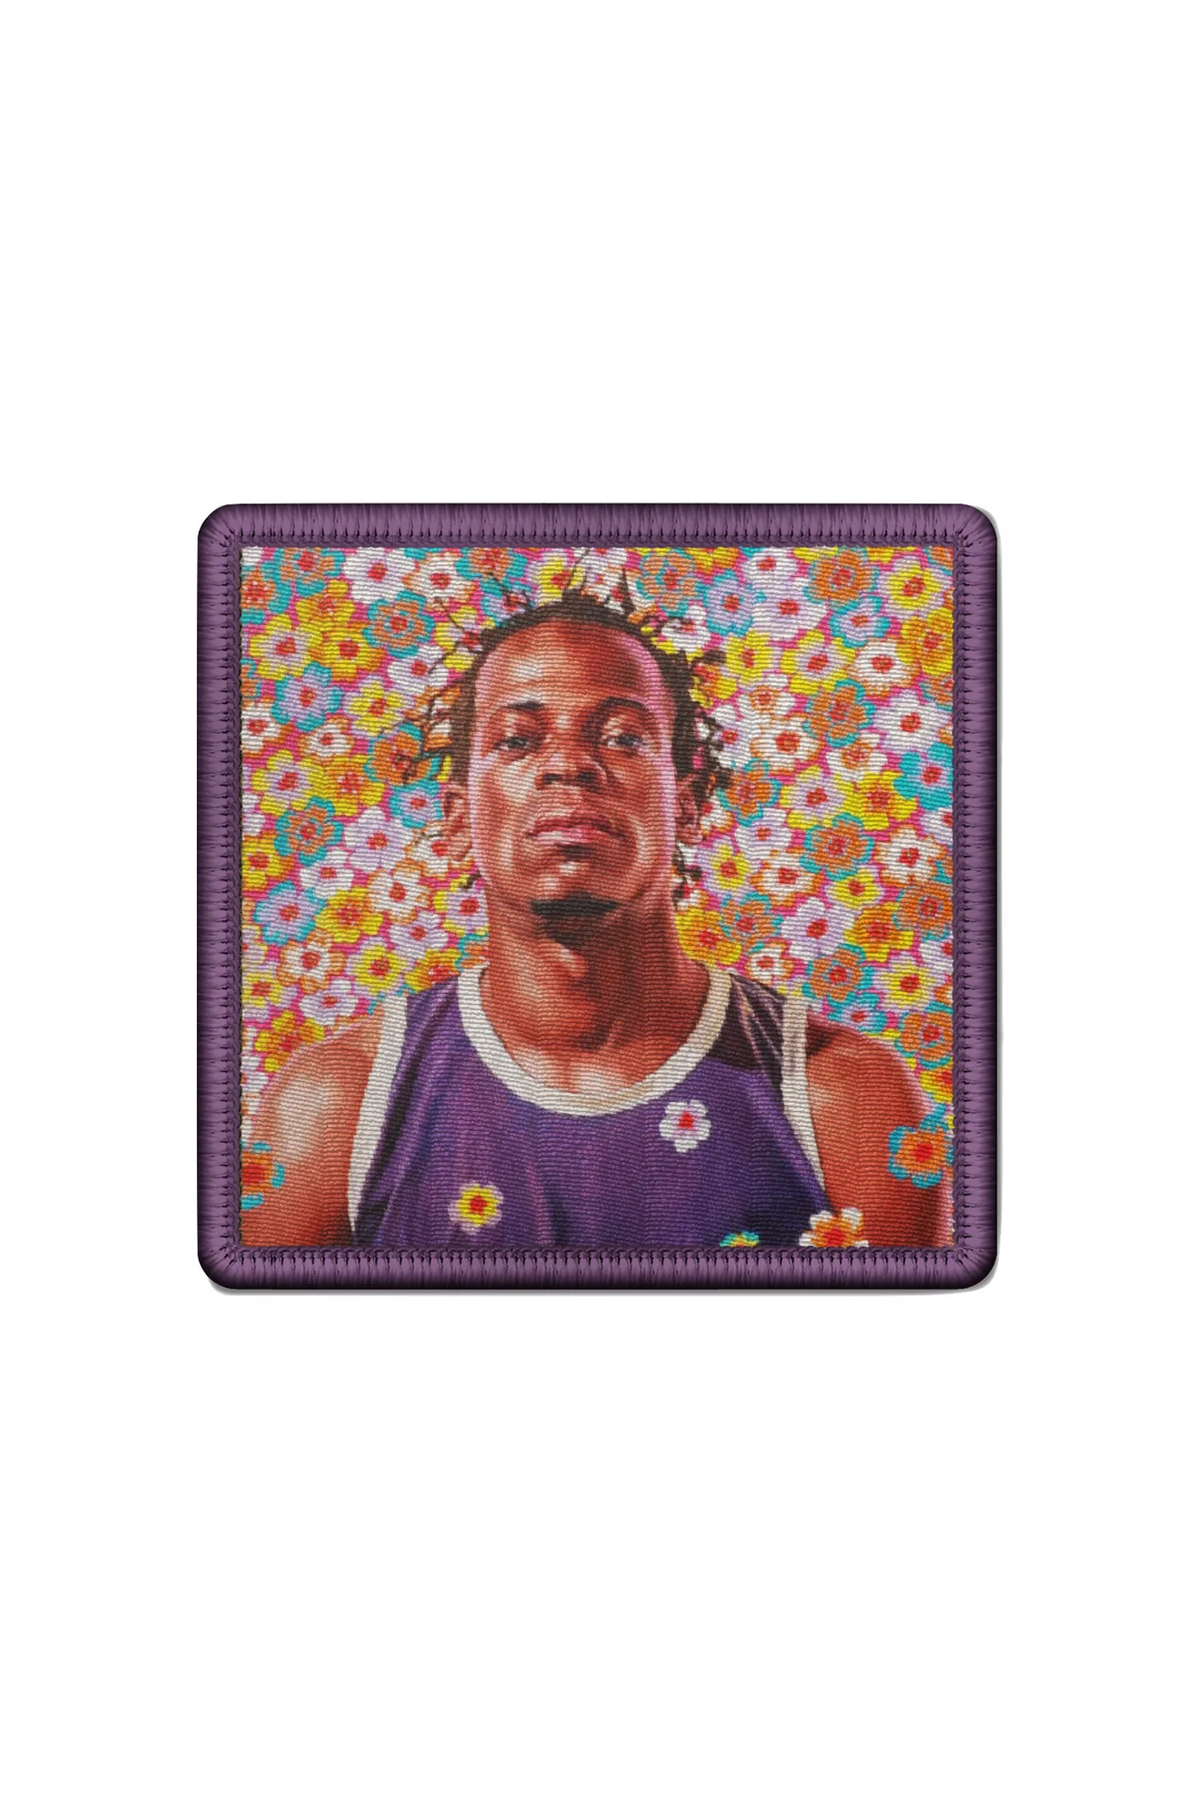 Kehinde Wiley World Stage Brazil I Patch